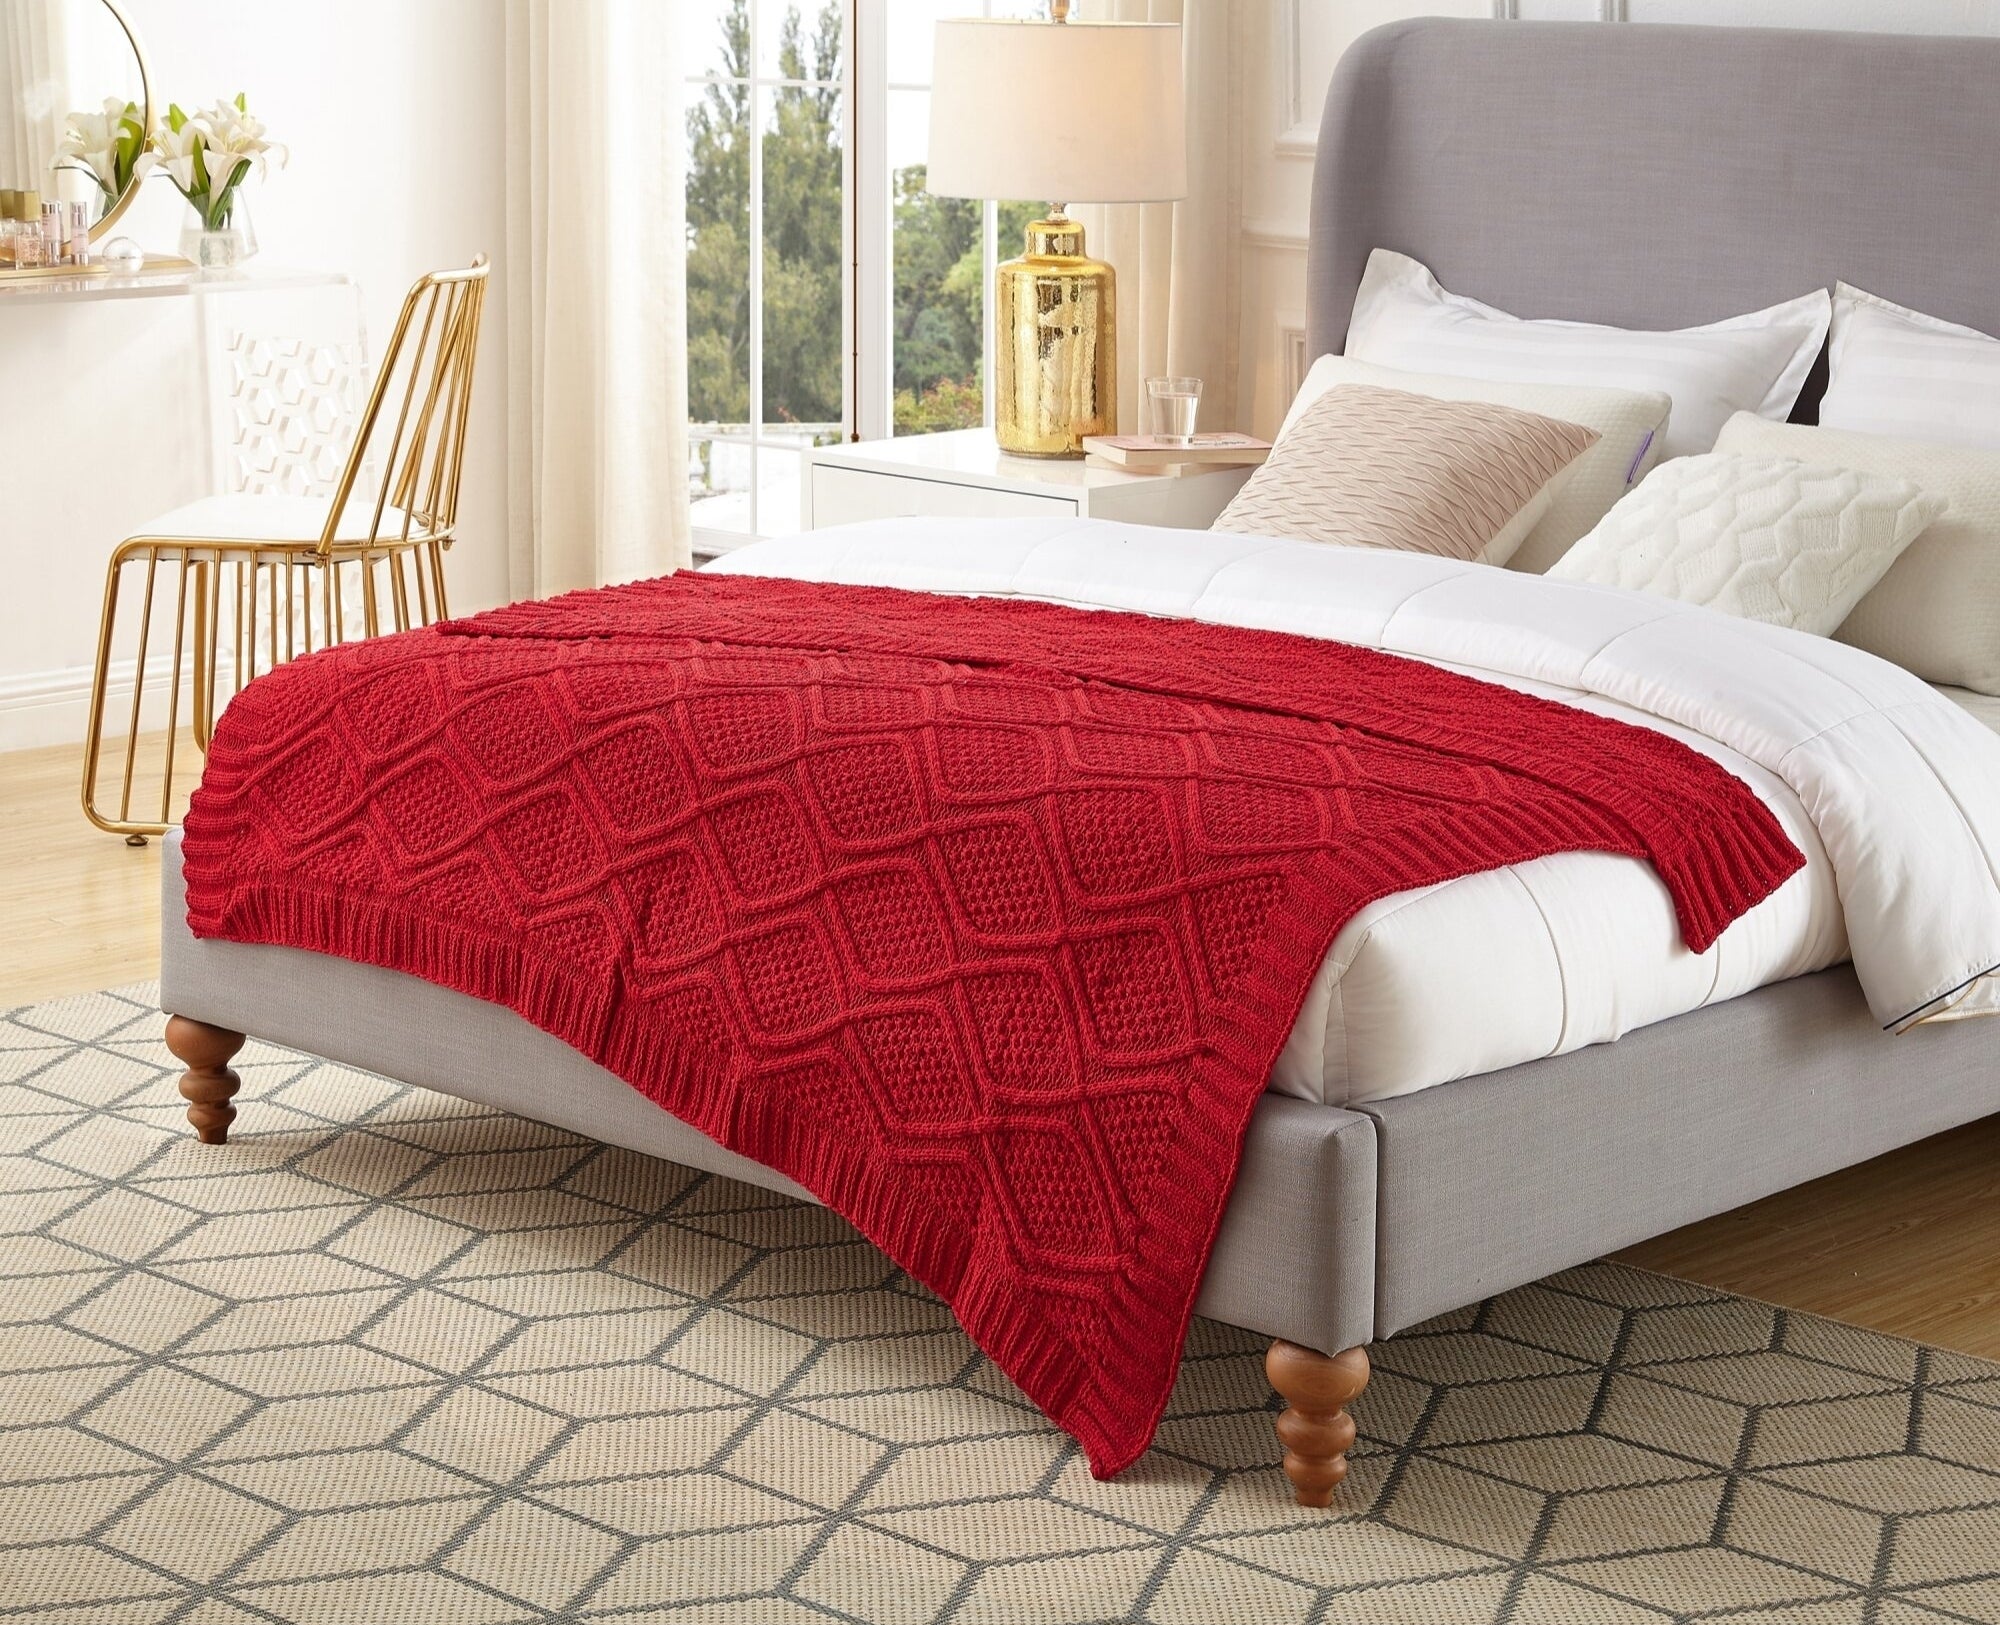 A knitted throw blanket on a bed